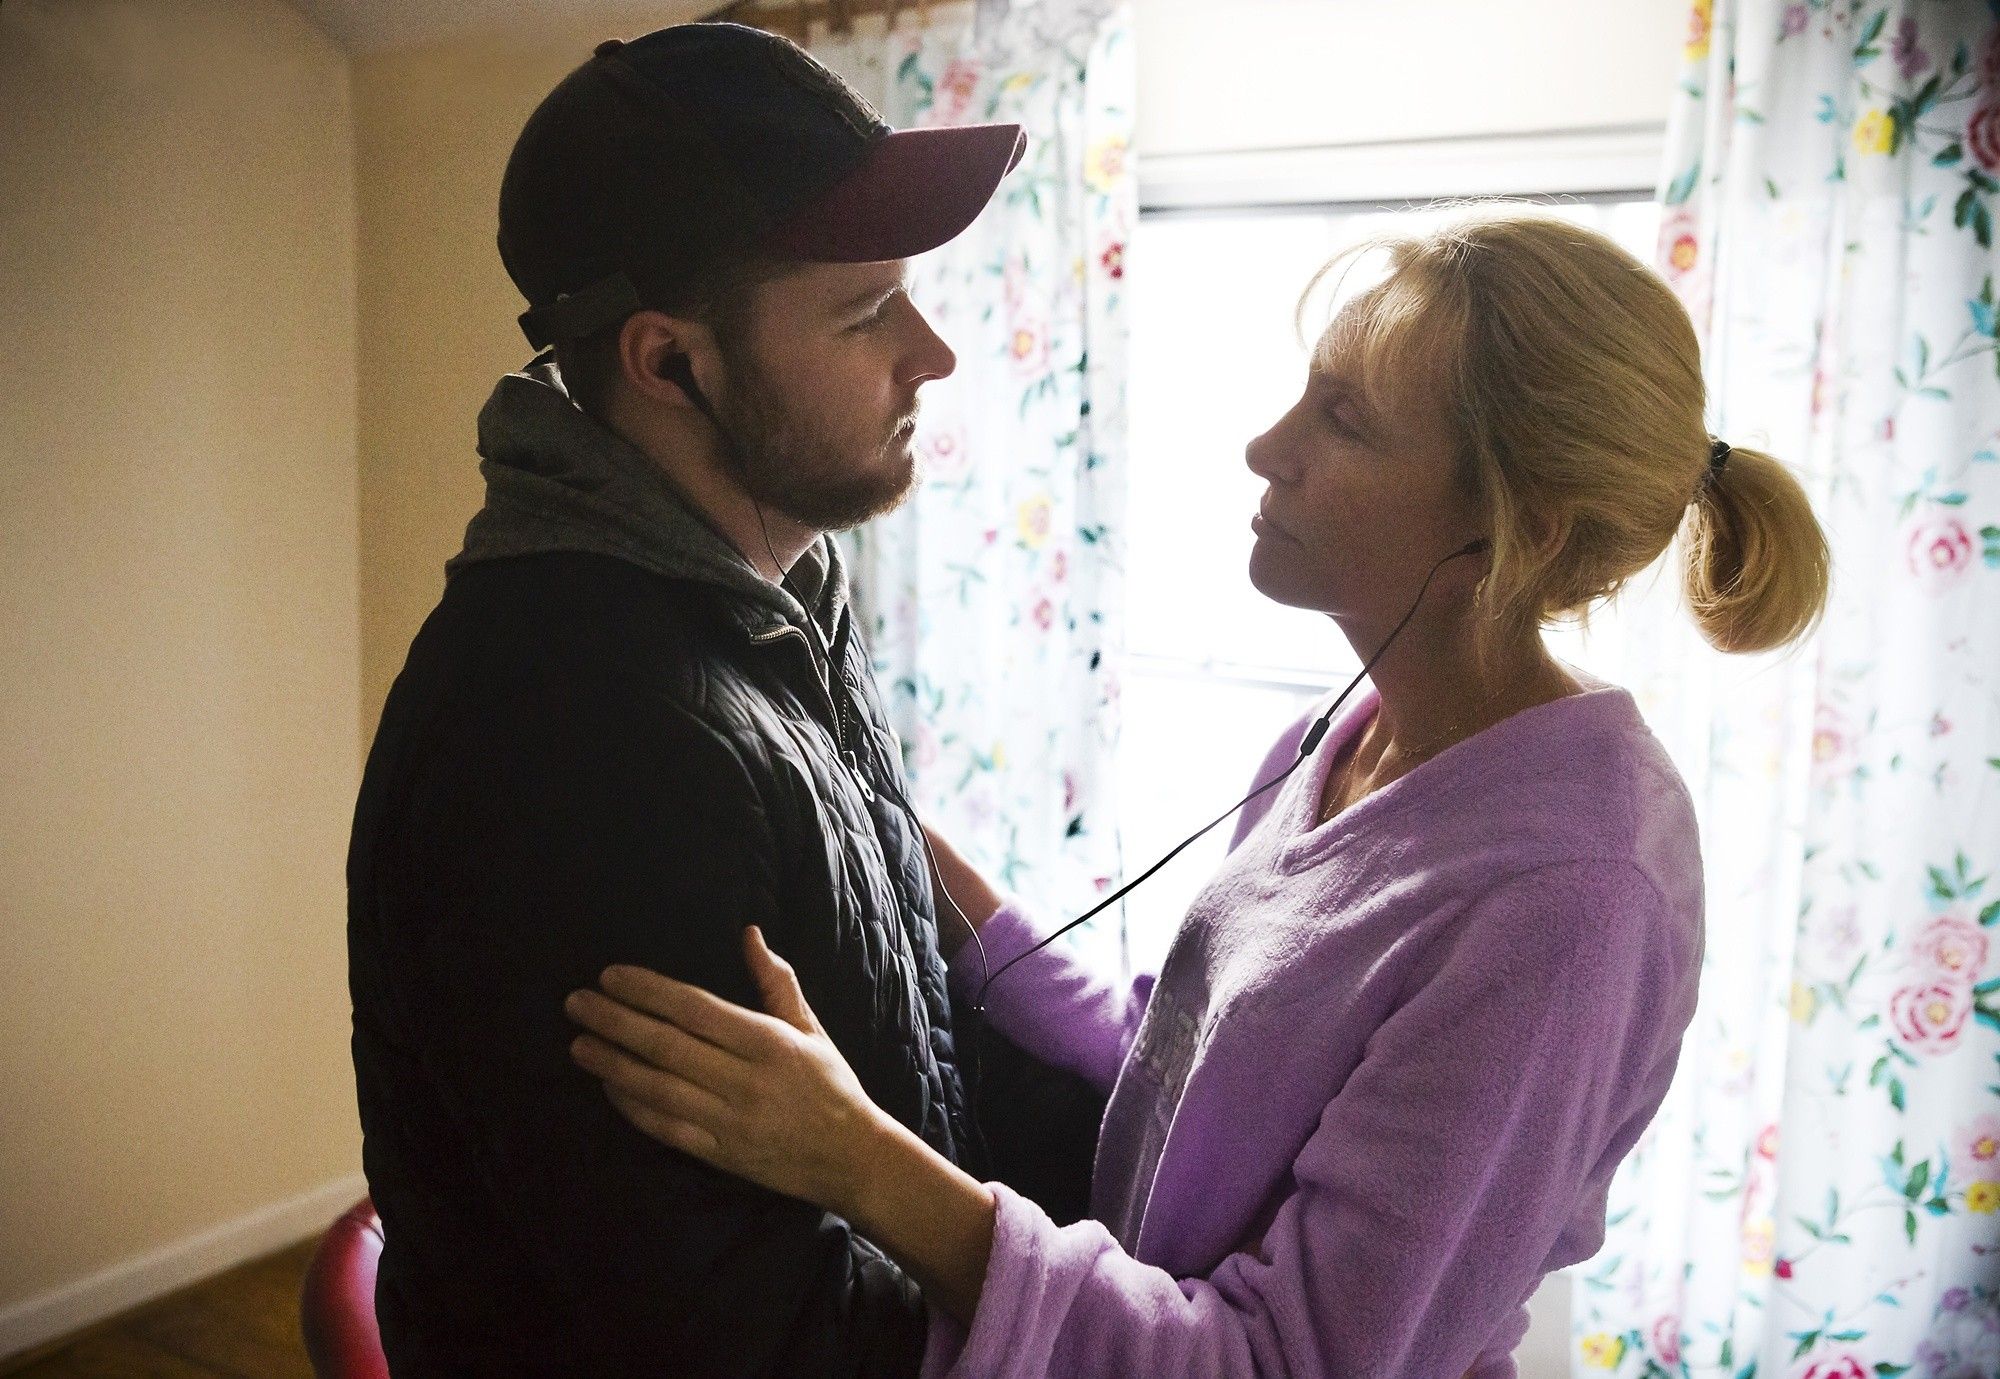 Jack Reynor stars as John and Toni Collette stars as Jean in Film Movement's Glassland (2016)